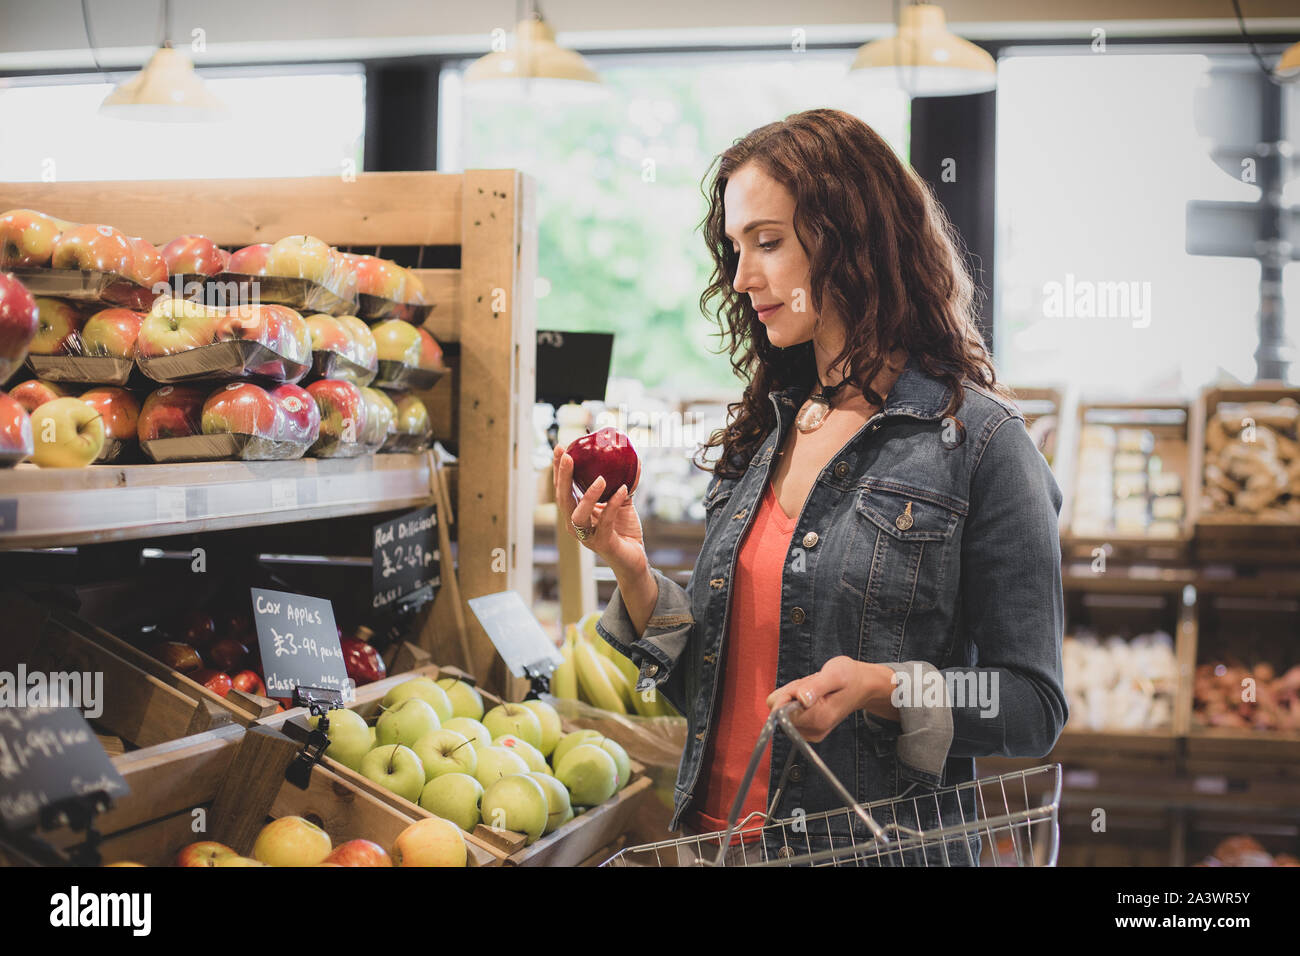 Female shopper buying apples in a grocery store Stock Photo